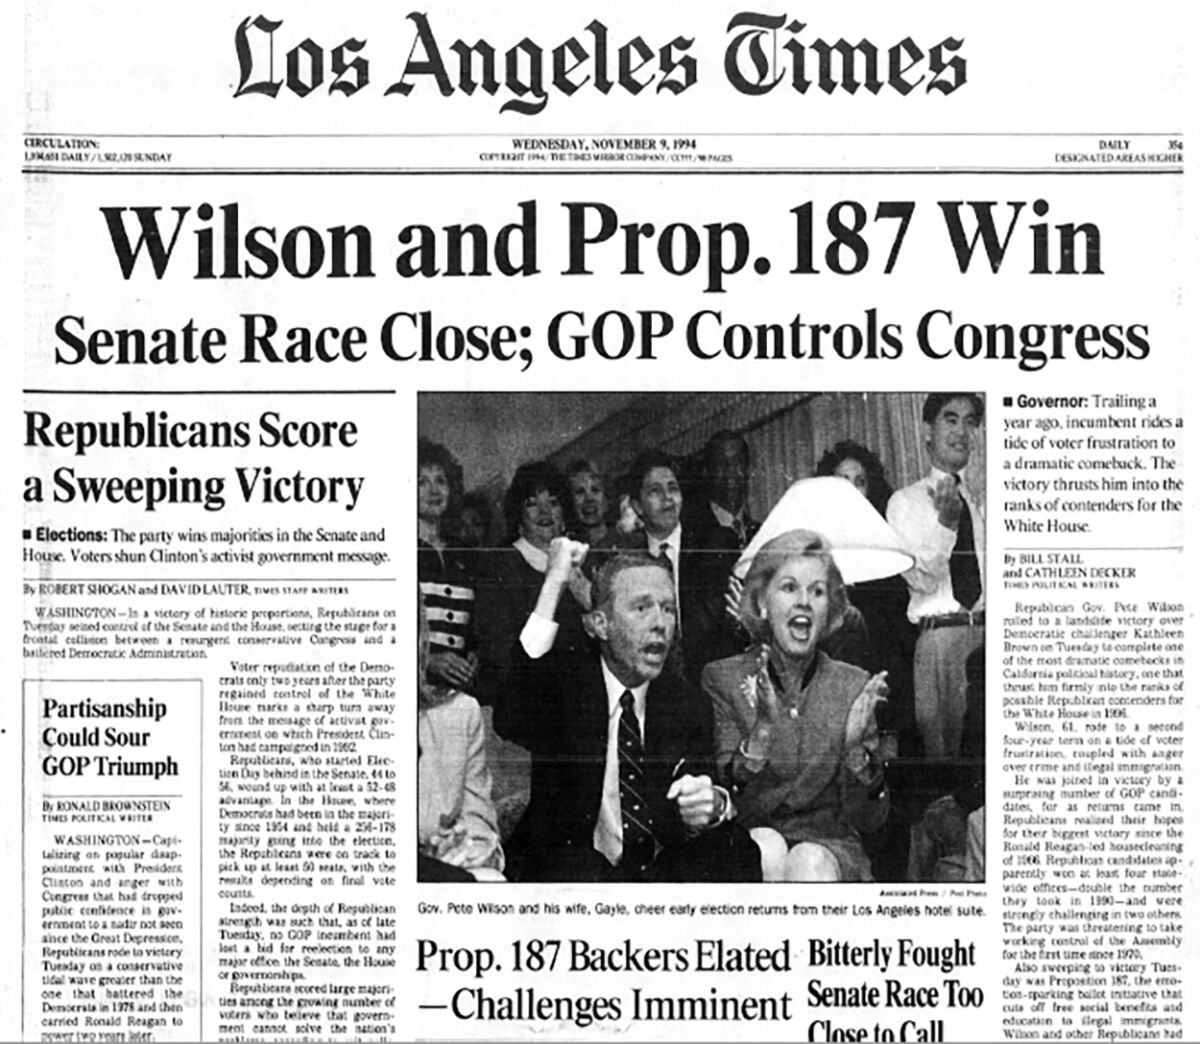 Nov. 9, 1994, front page of Los Angeles Times